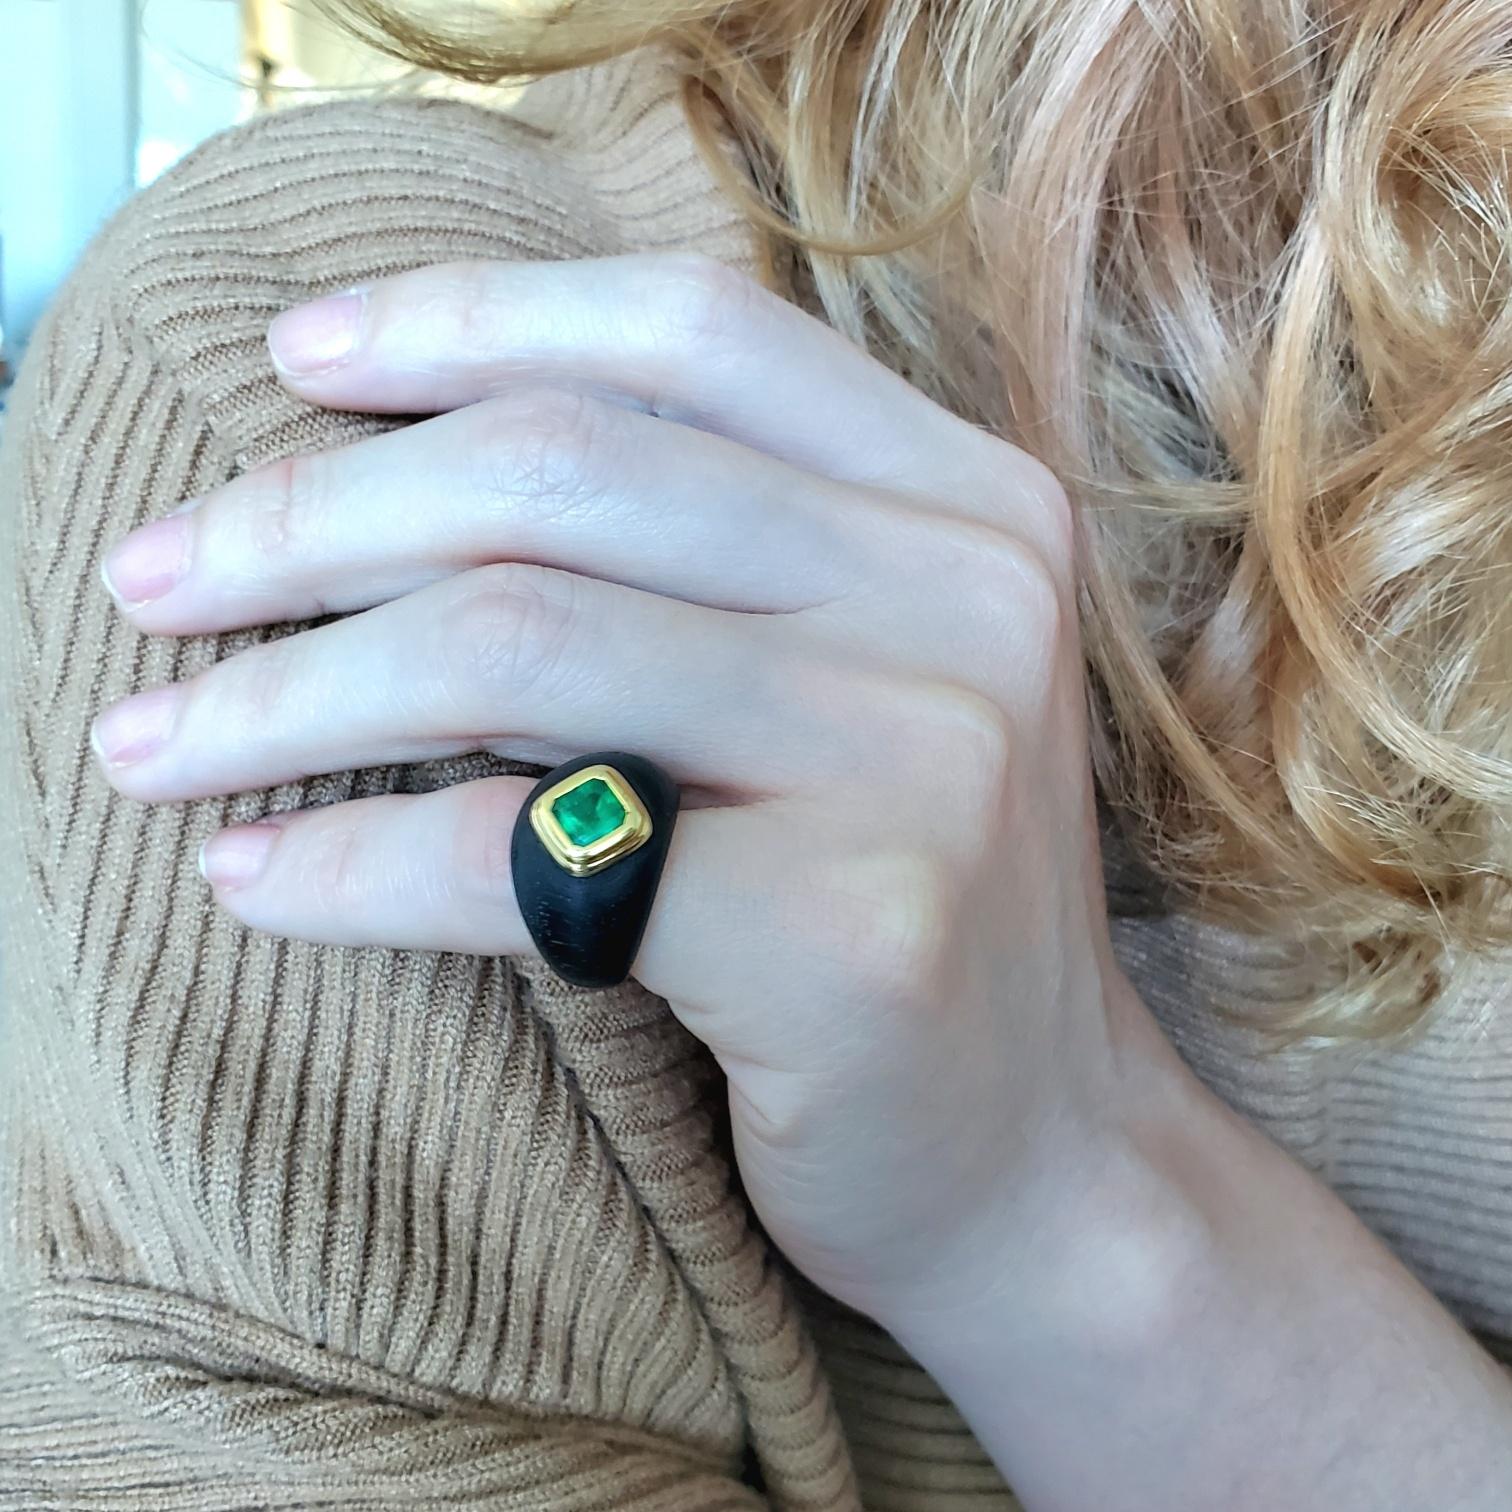 An emerald ring designed by Rene Boivin.

Very rare and beautiful ring, created in Paris France by the jewelry house of Rene Boivin, back in the 1970's. This ring has been crafted in solid yellow gold of 18 karats with very high polished finish and